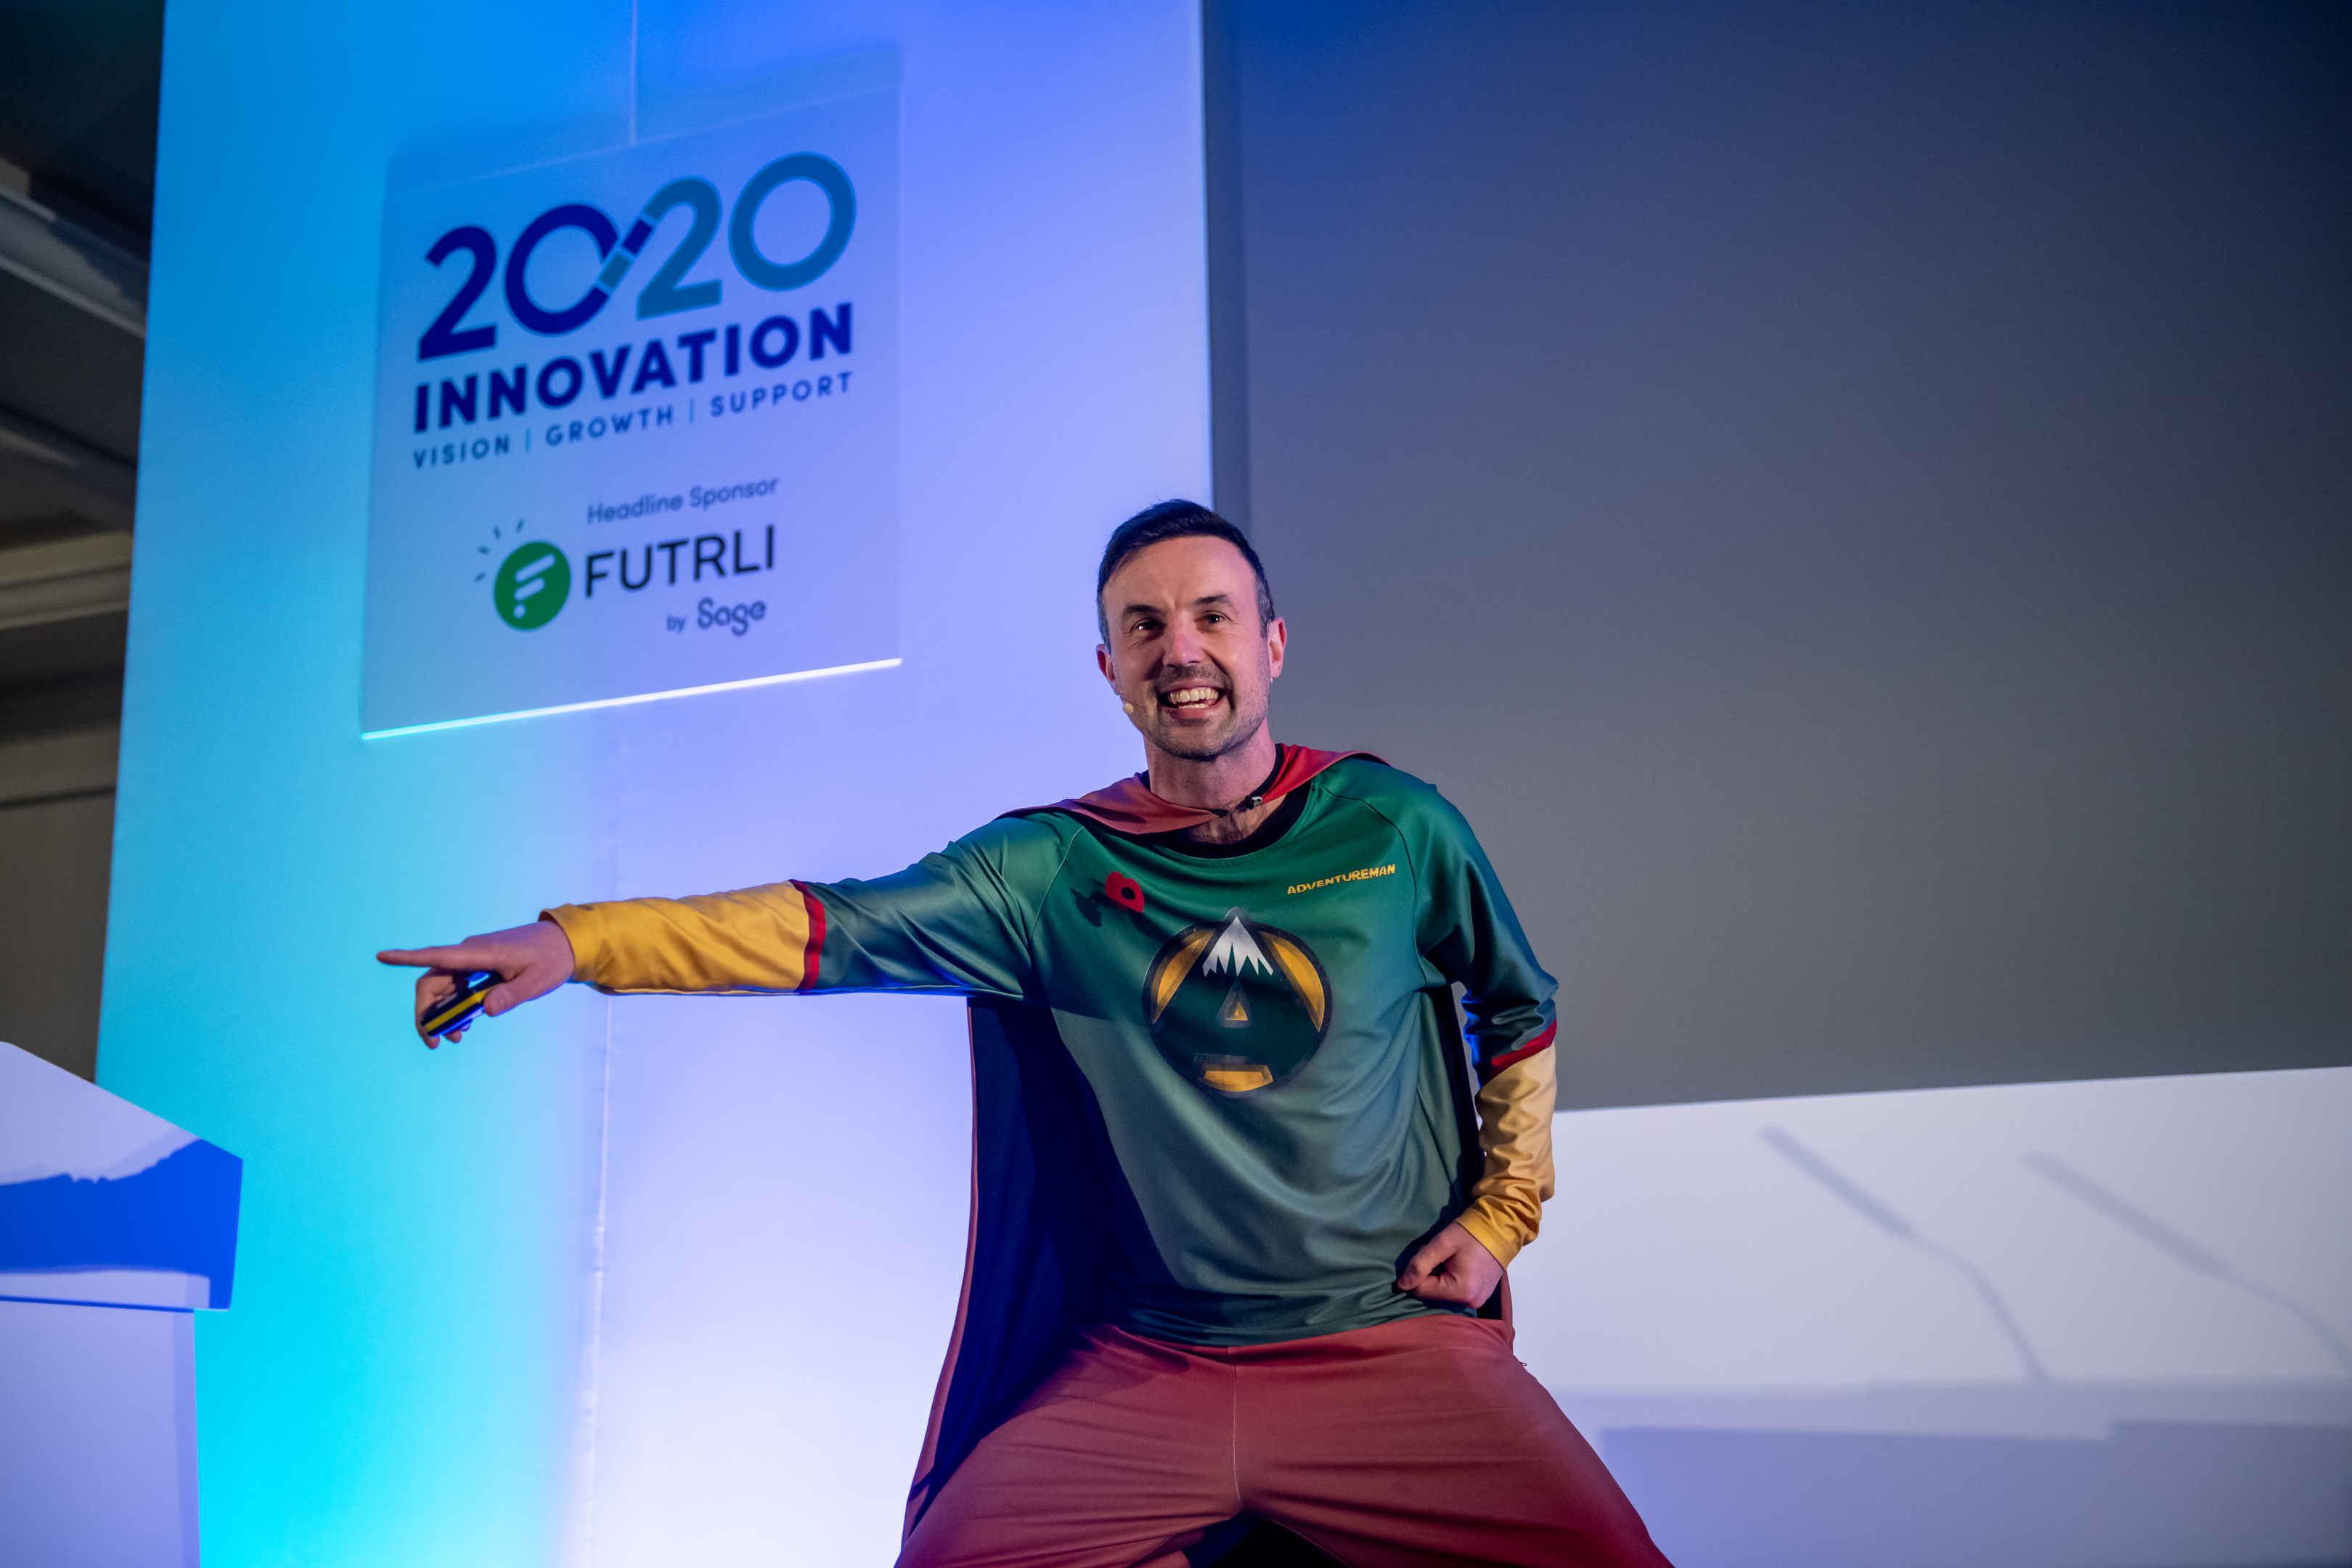 Adventureman at the 2020 Innovation Annual Conference